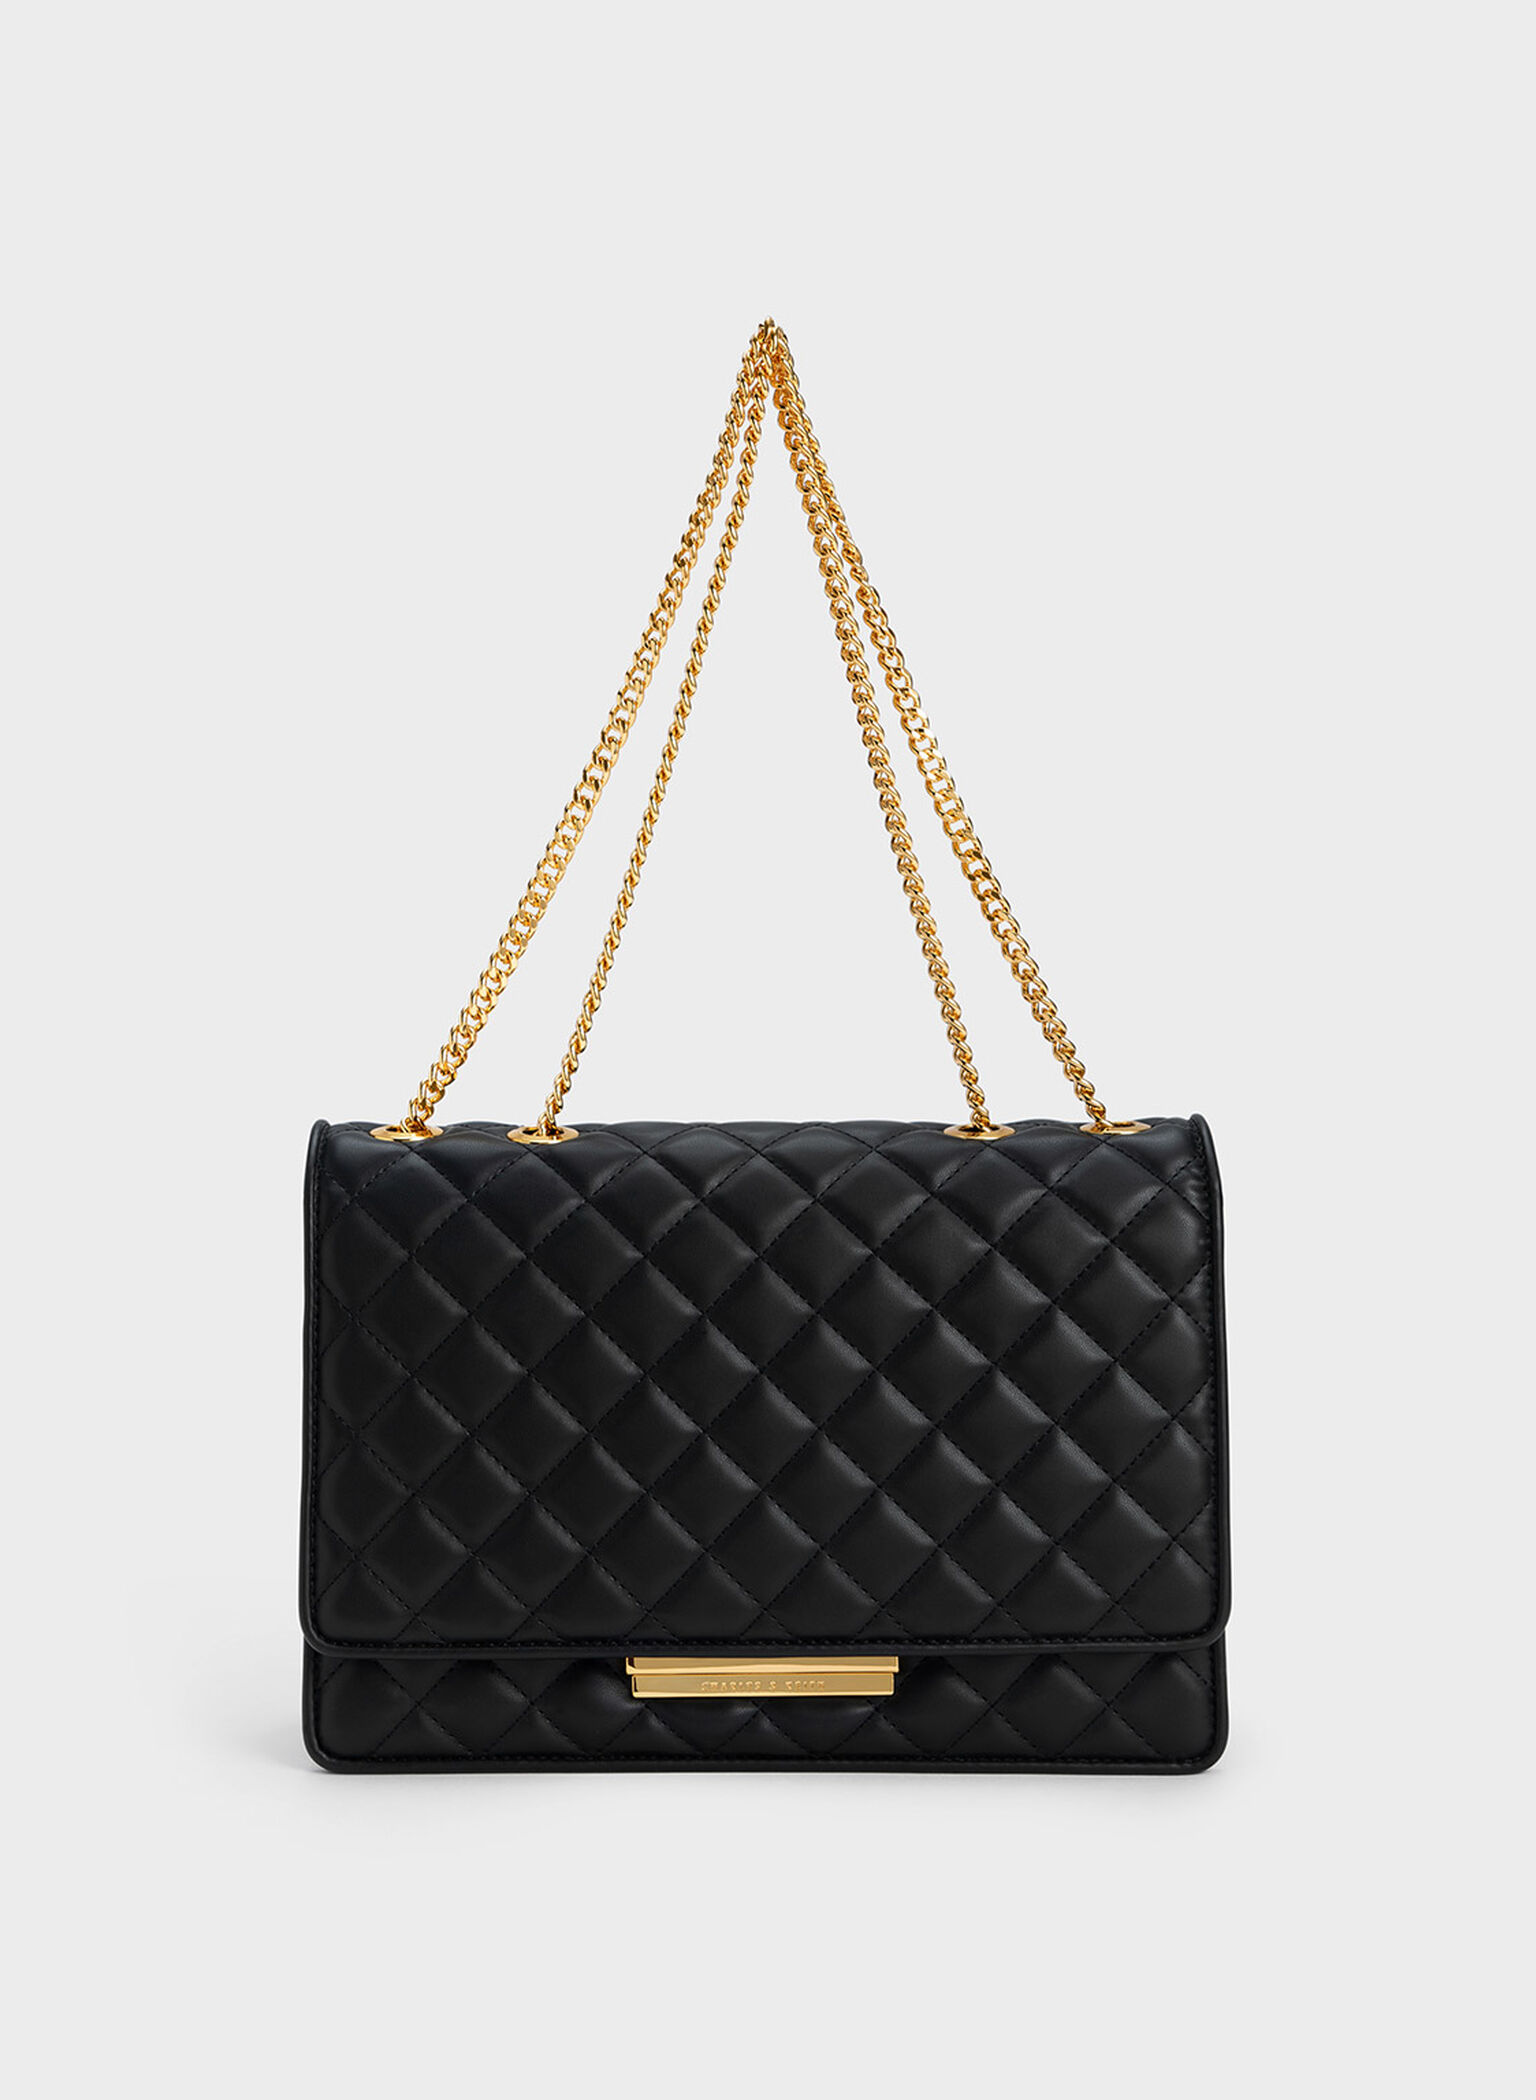 Pu Leather Adjustable Chanel Handbags, For Office